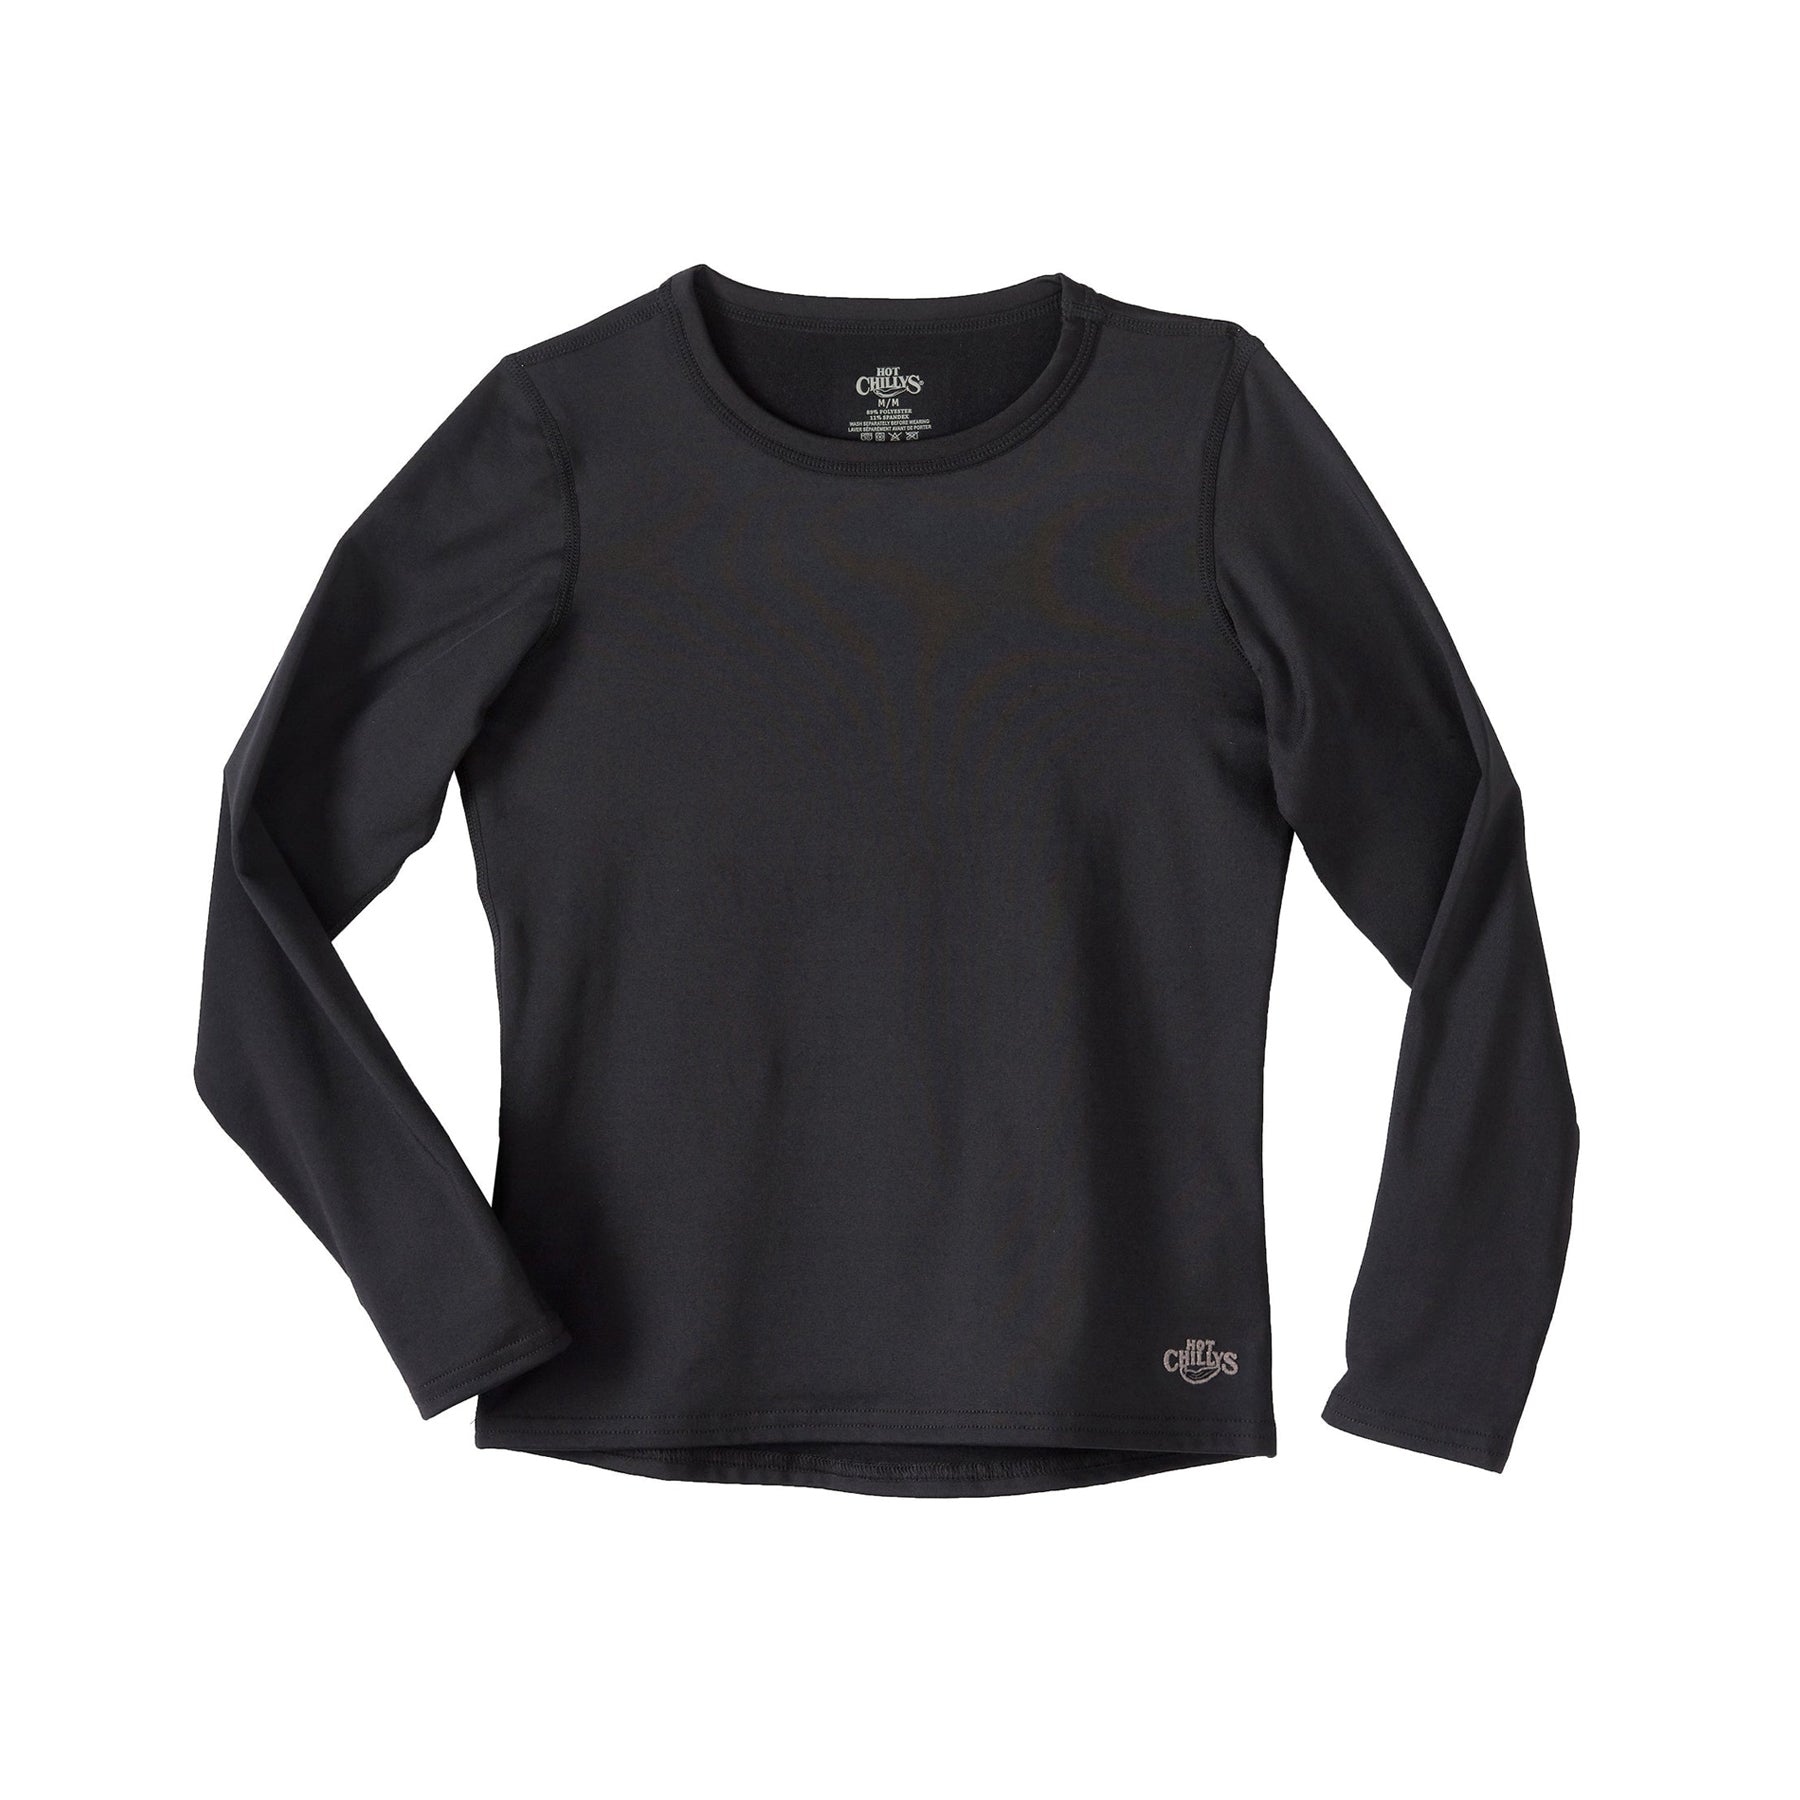 Hot Chillys Youth Micro-Elite Chamois Crewneck